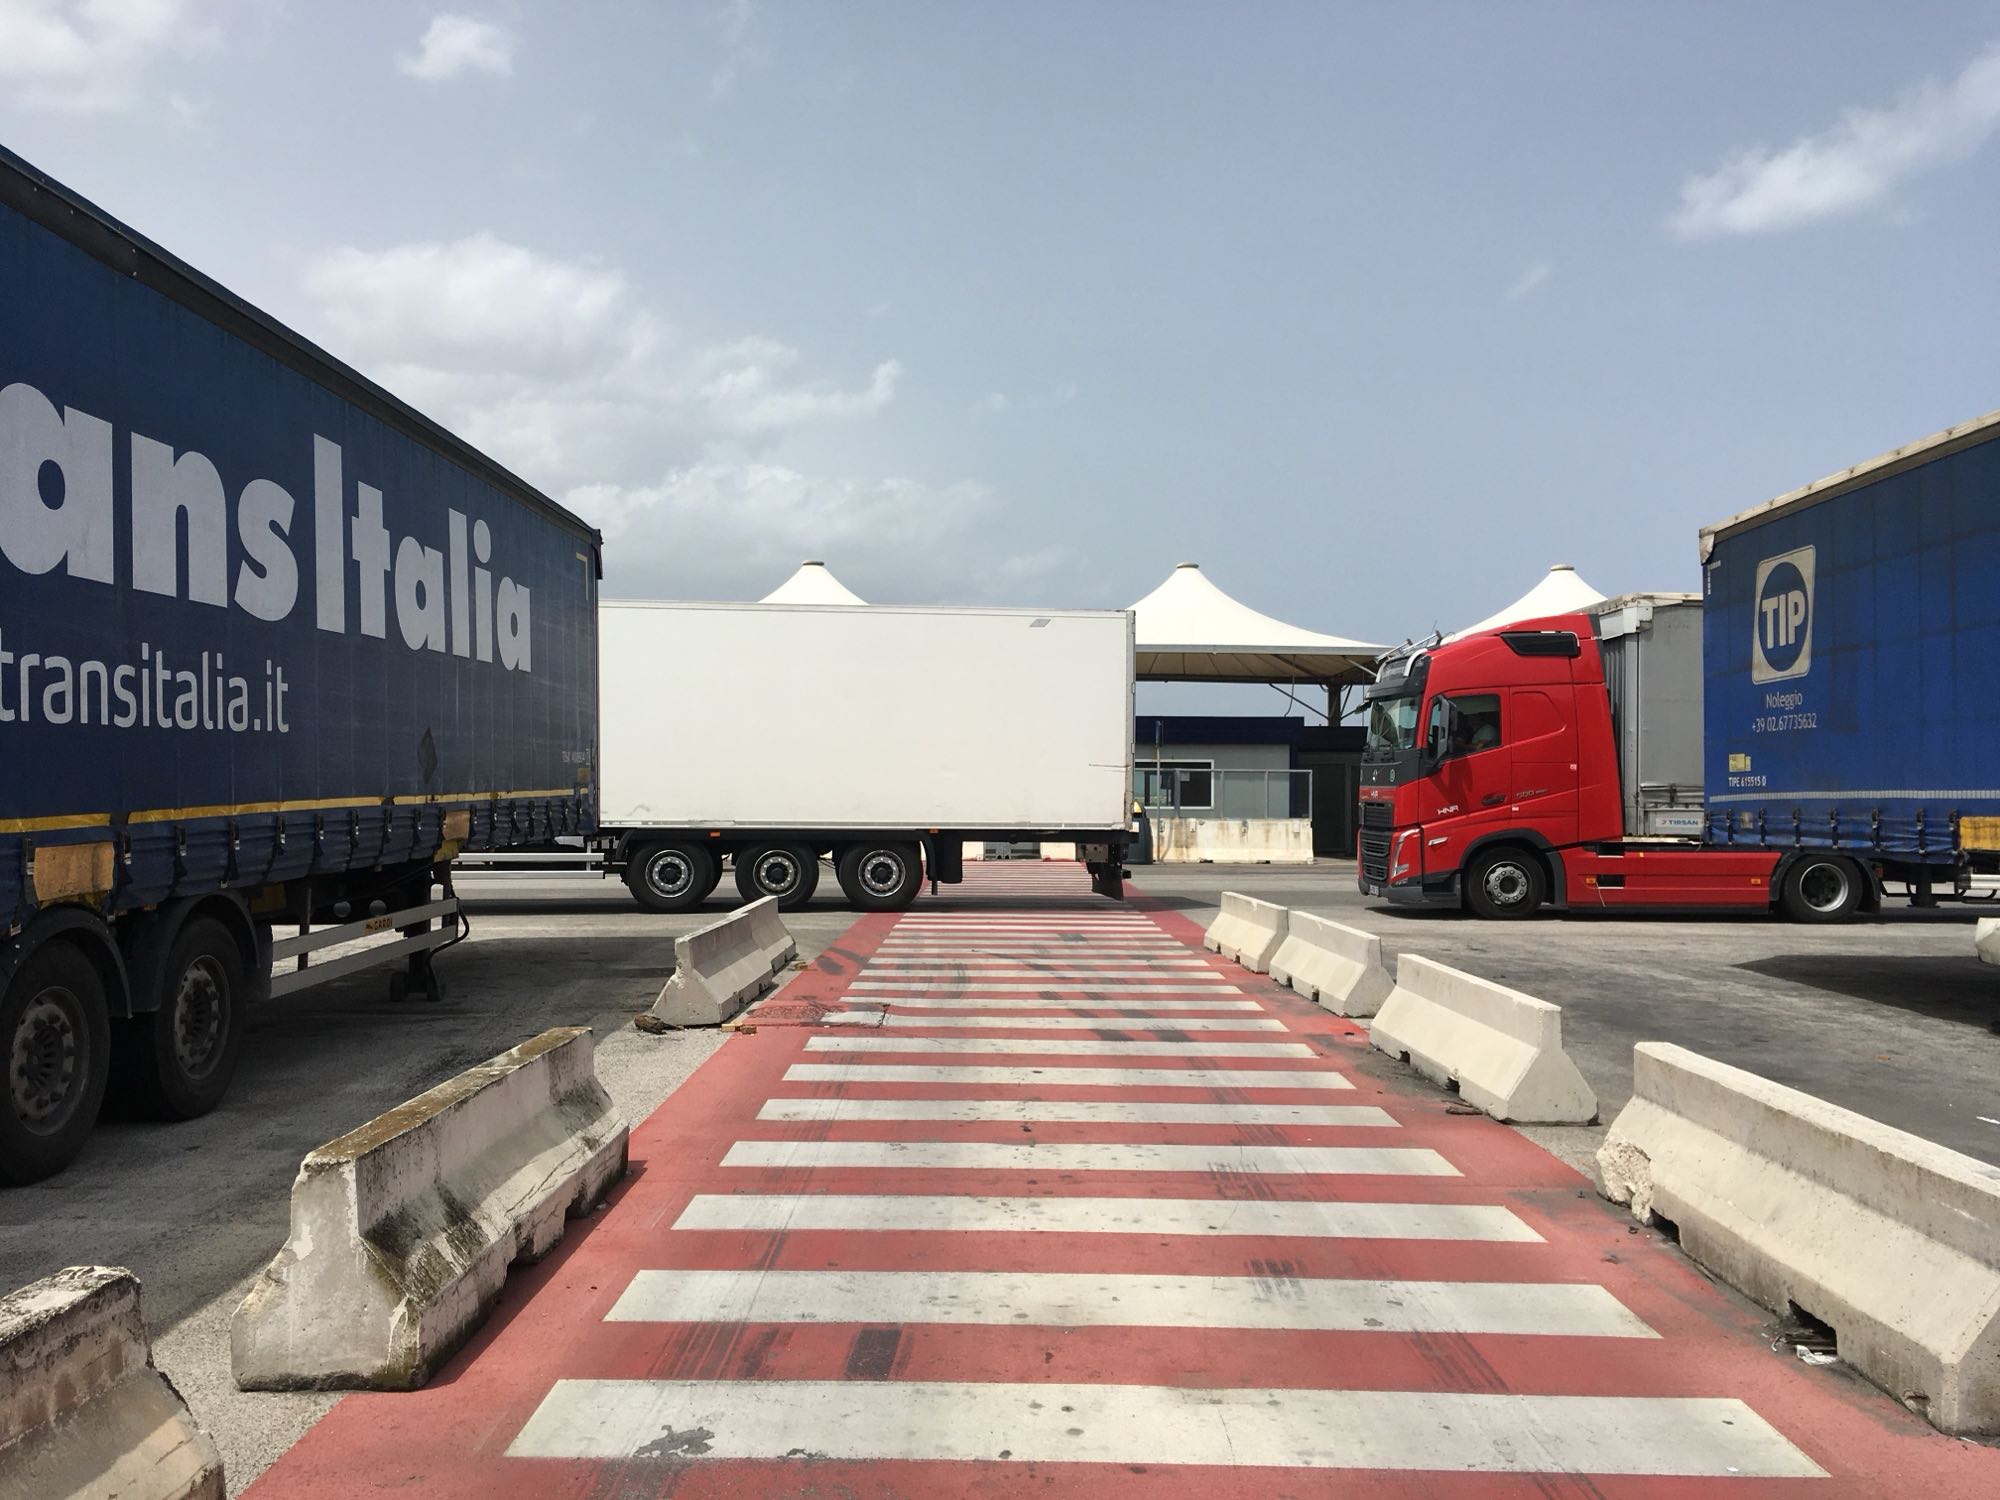 Photo of pedestrian crossing with lorries all around including over the crossing